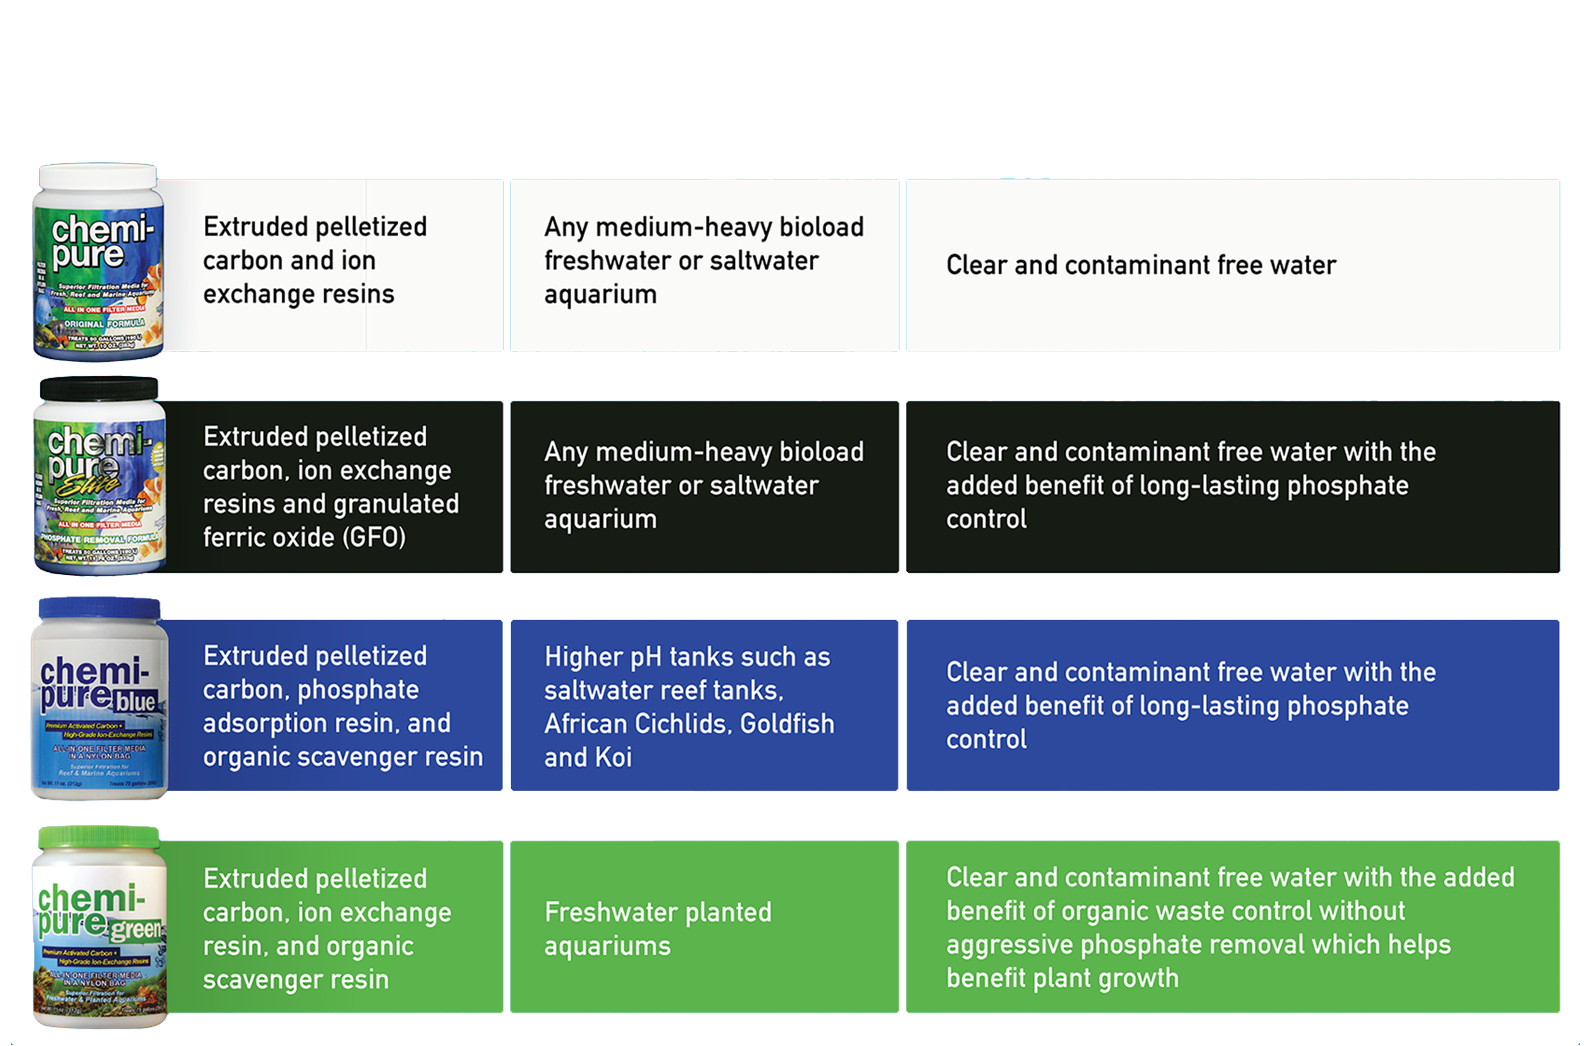 chemipure-guide-NEW.png